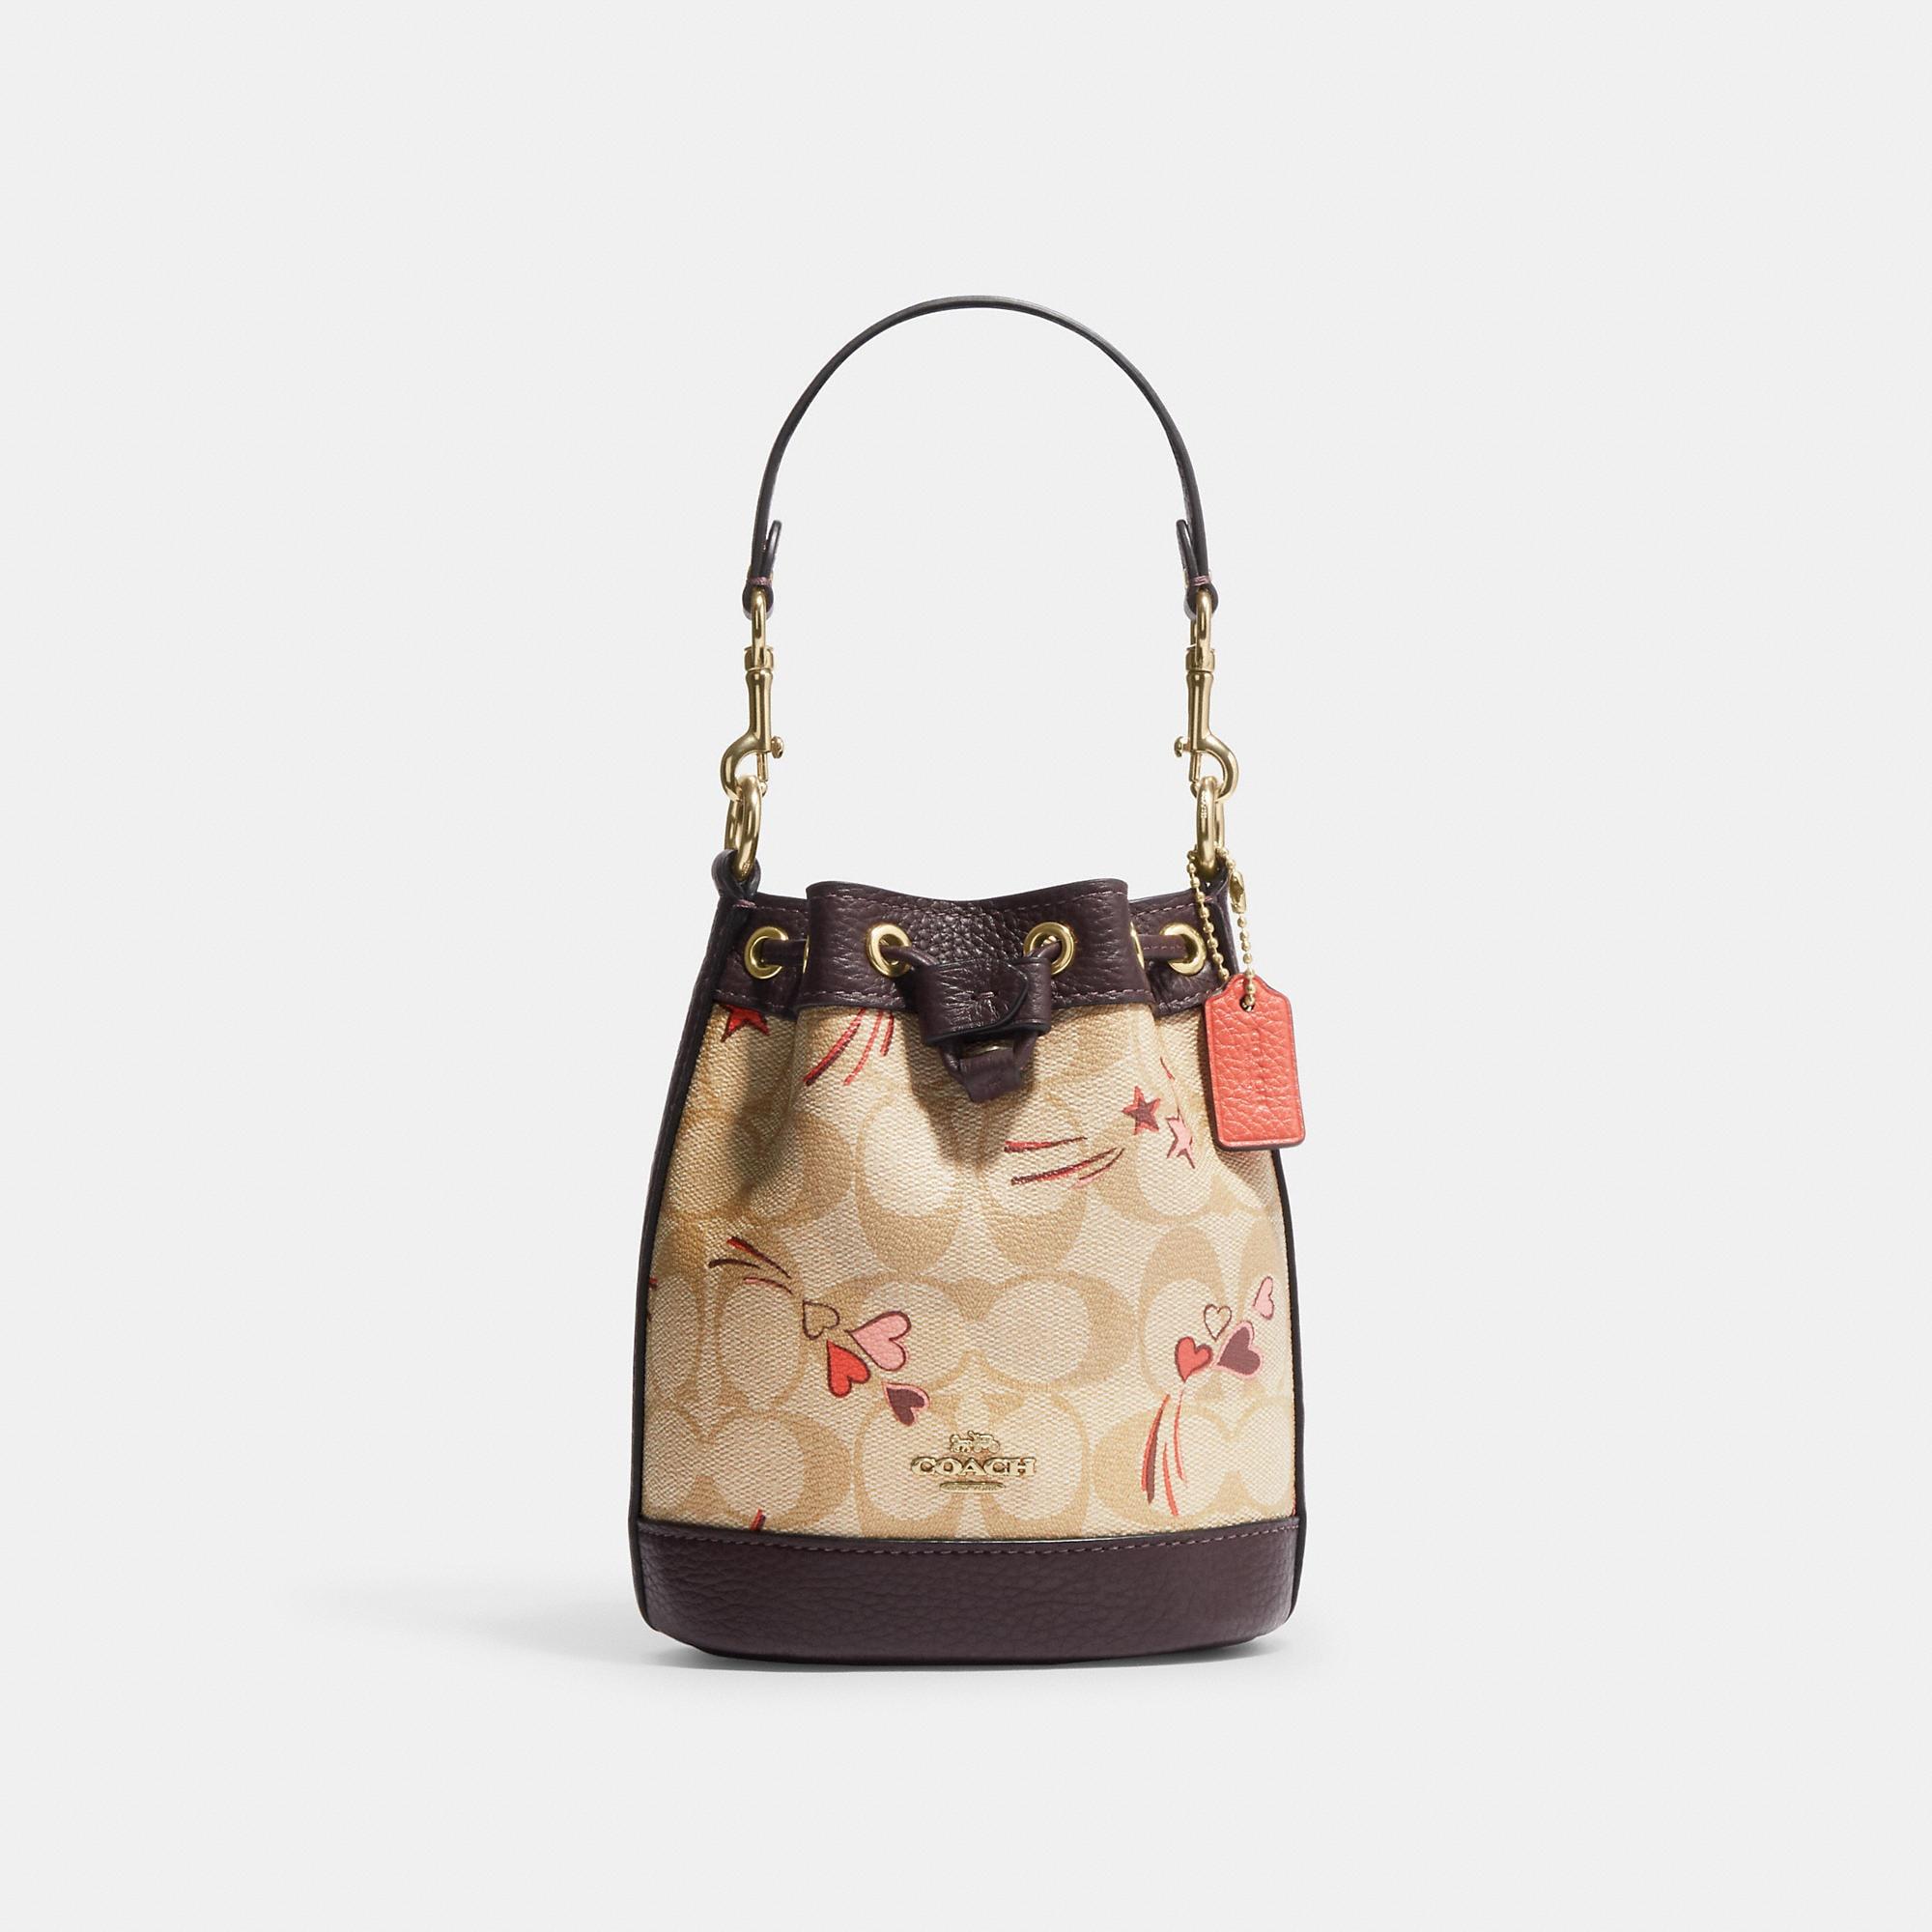 Coach Field Tote 22 in Signature Canvas with Heart Print